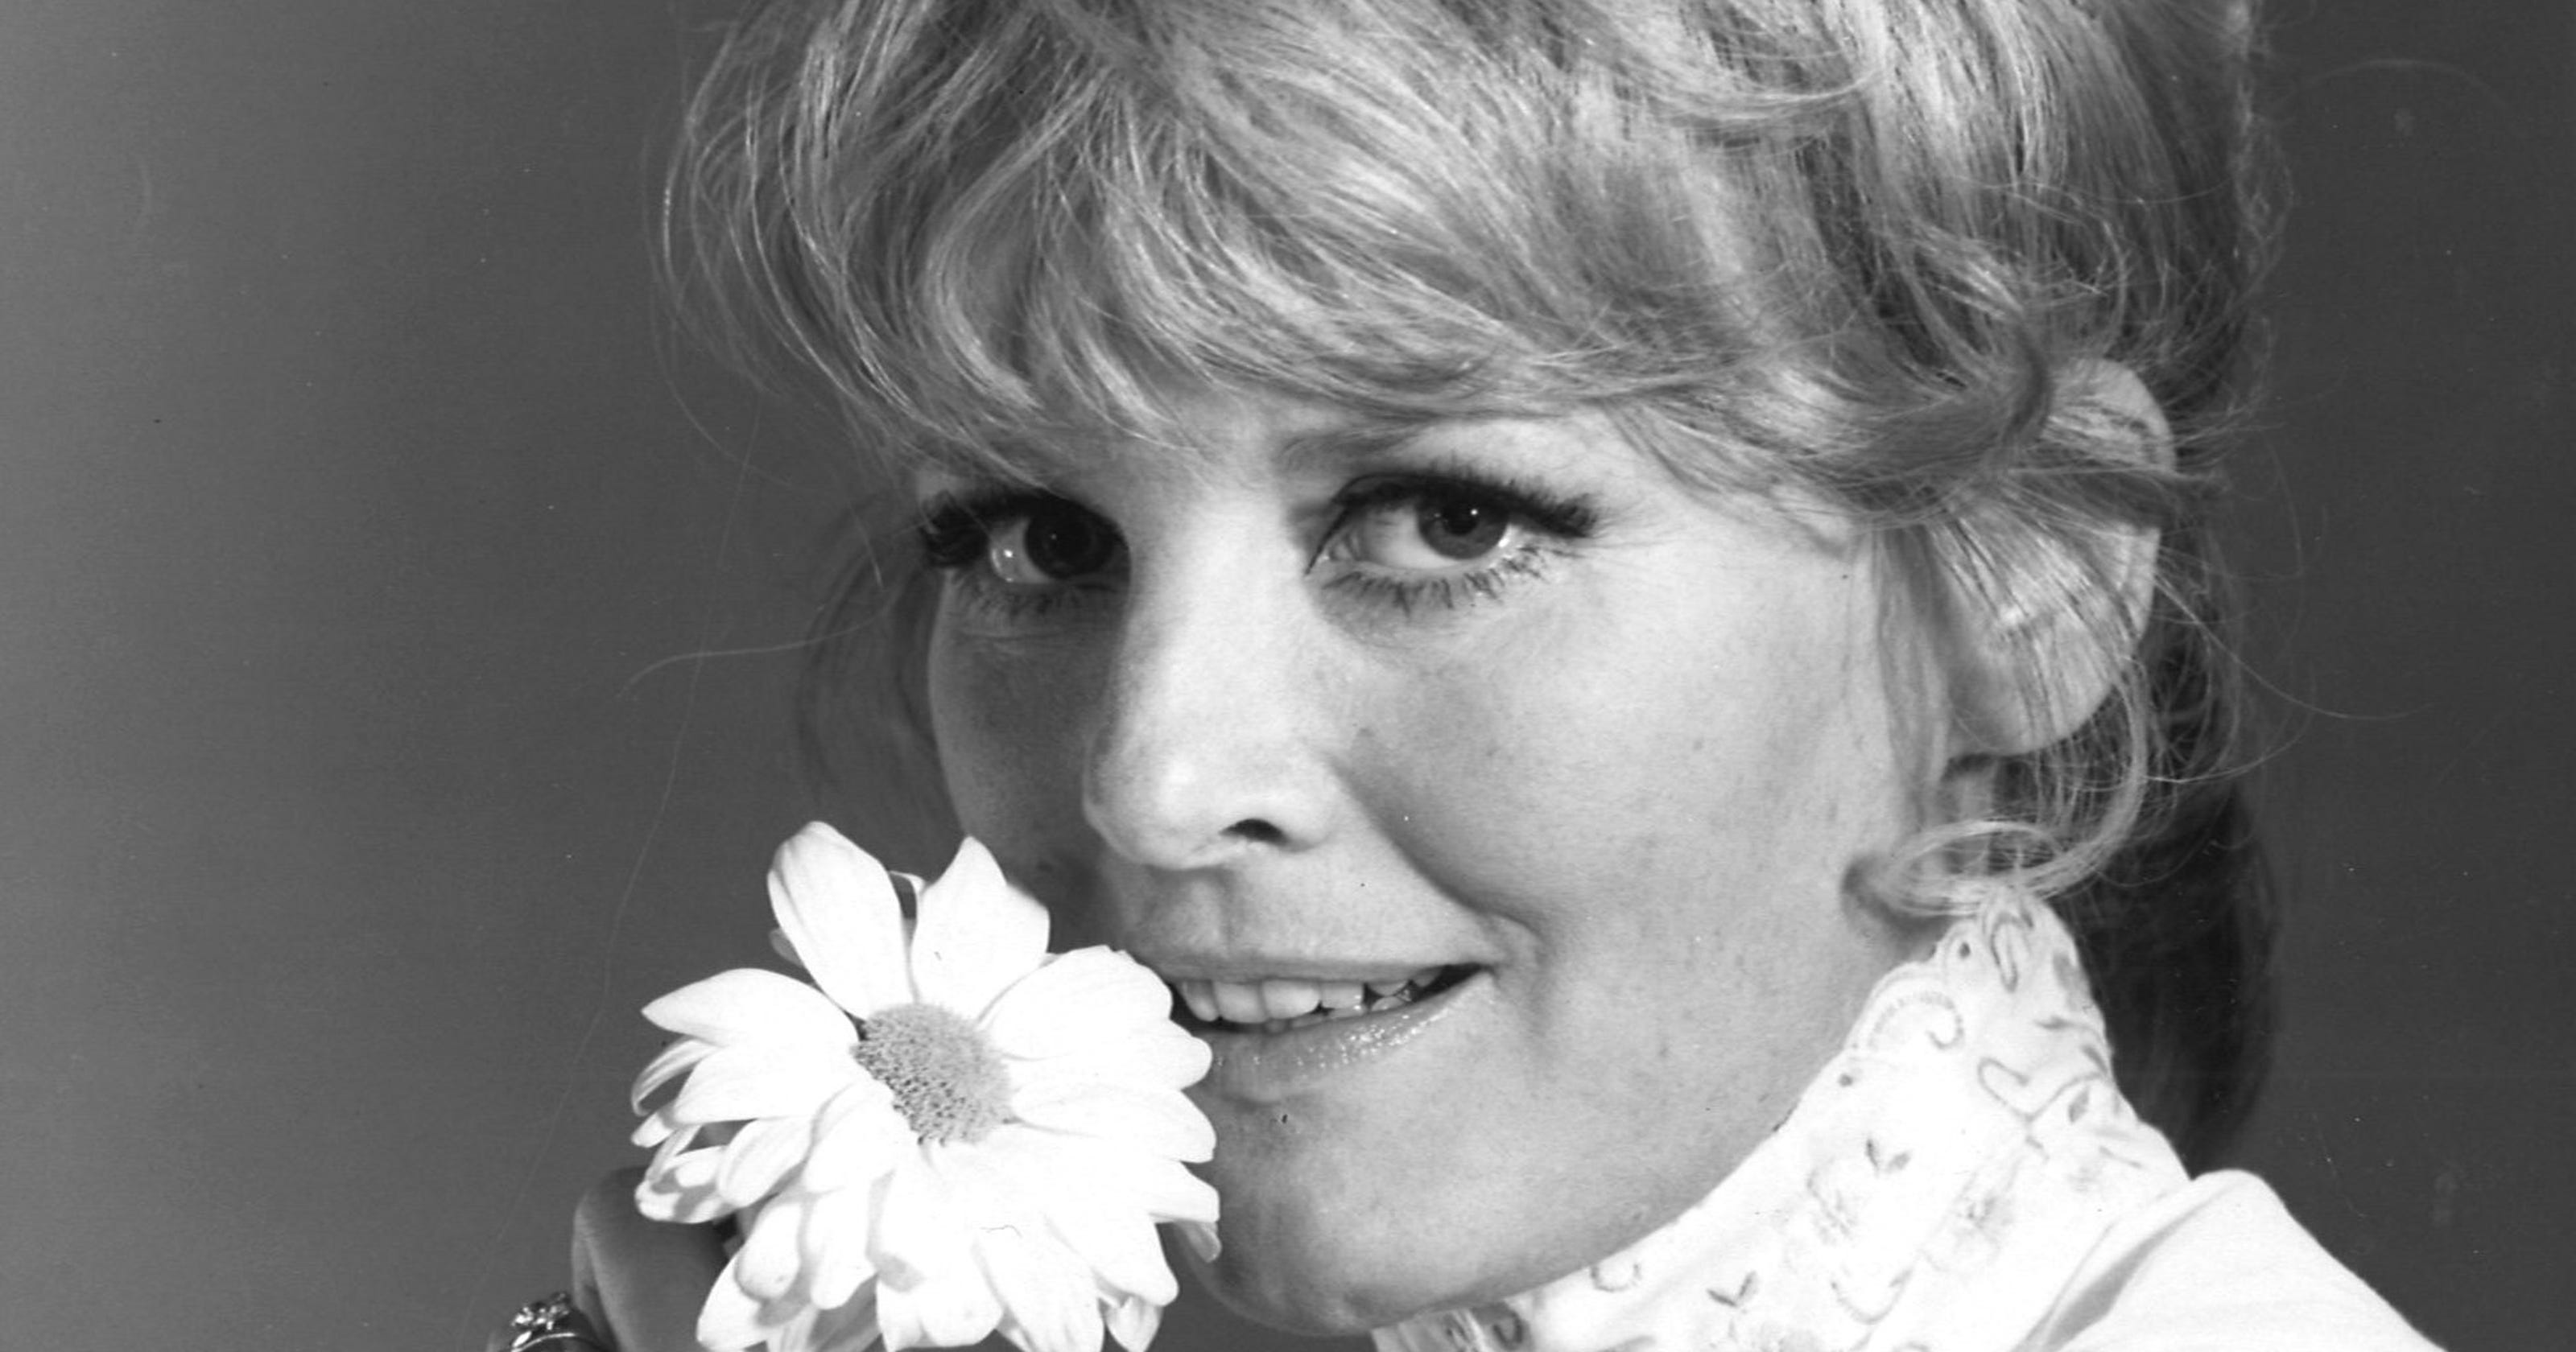 At age 86, '60s singer Petula Clark refuses to defined by nostalgia